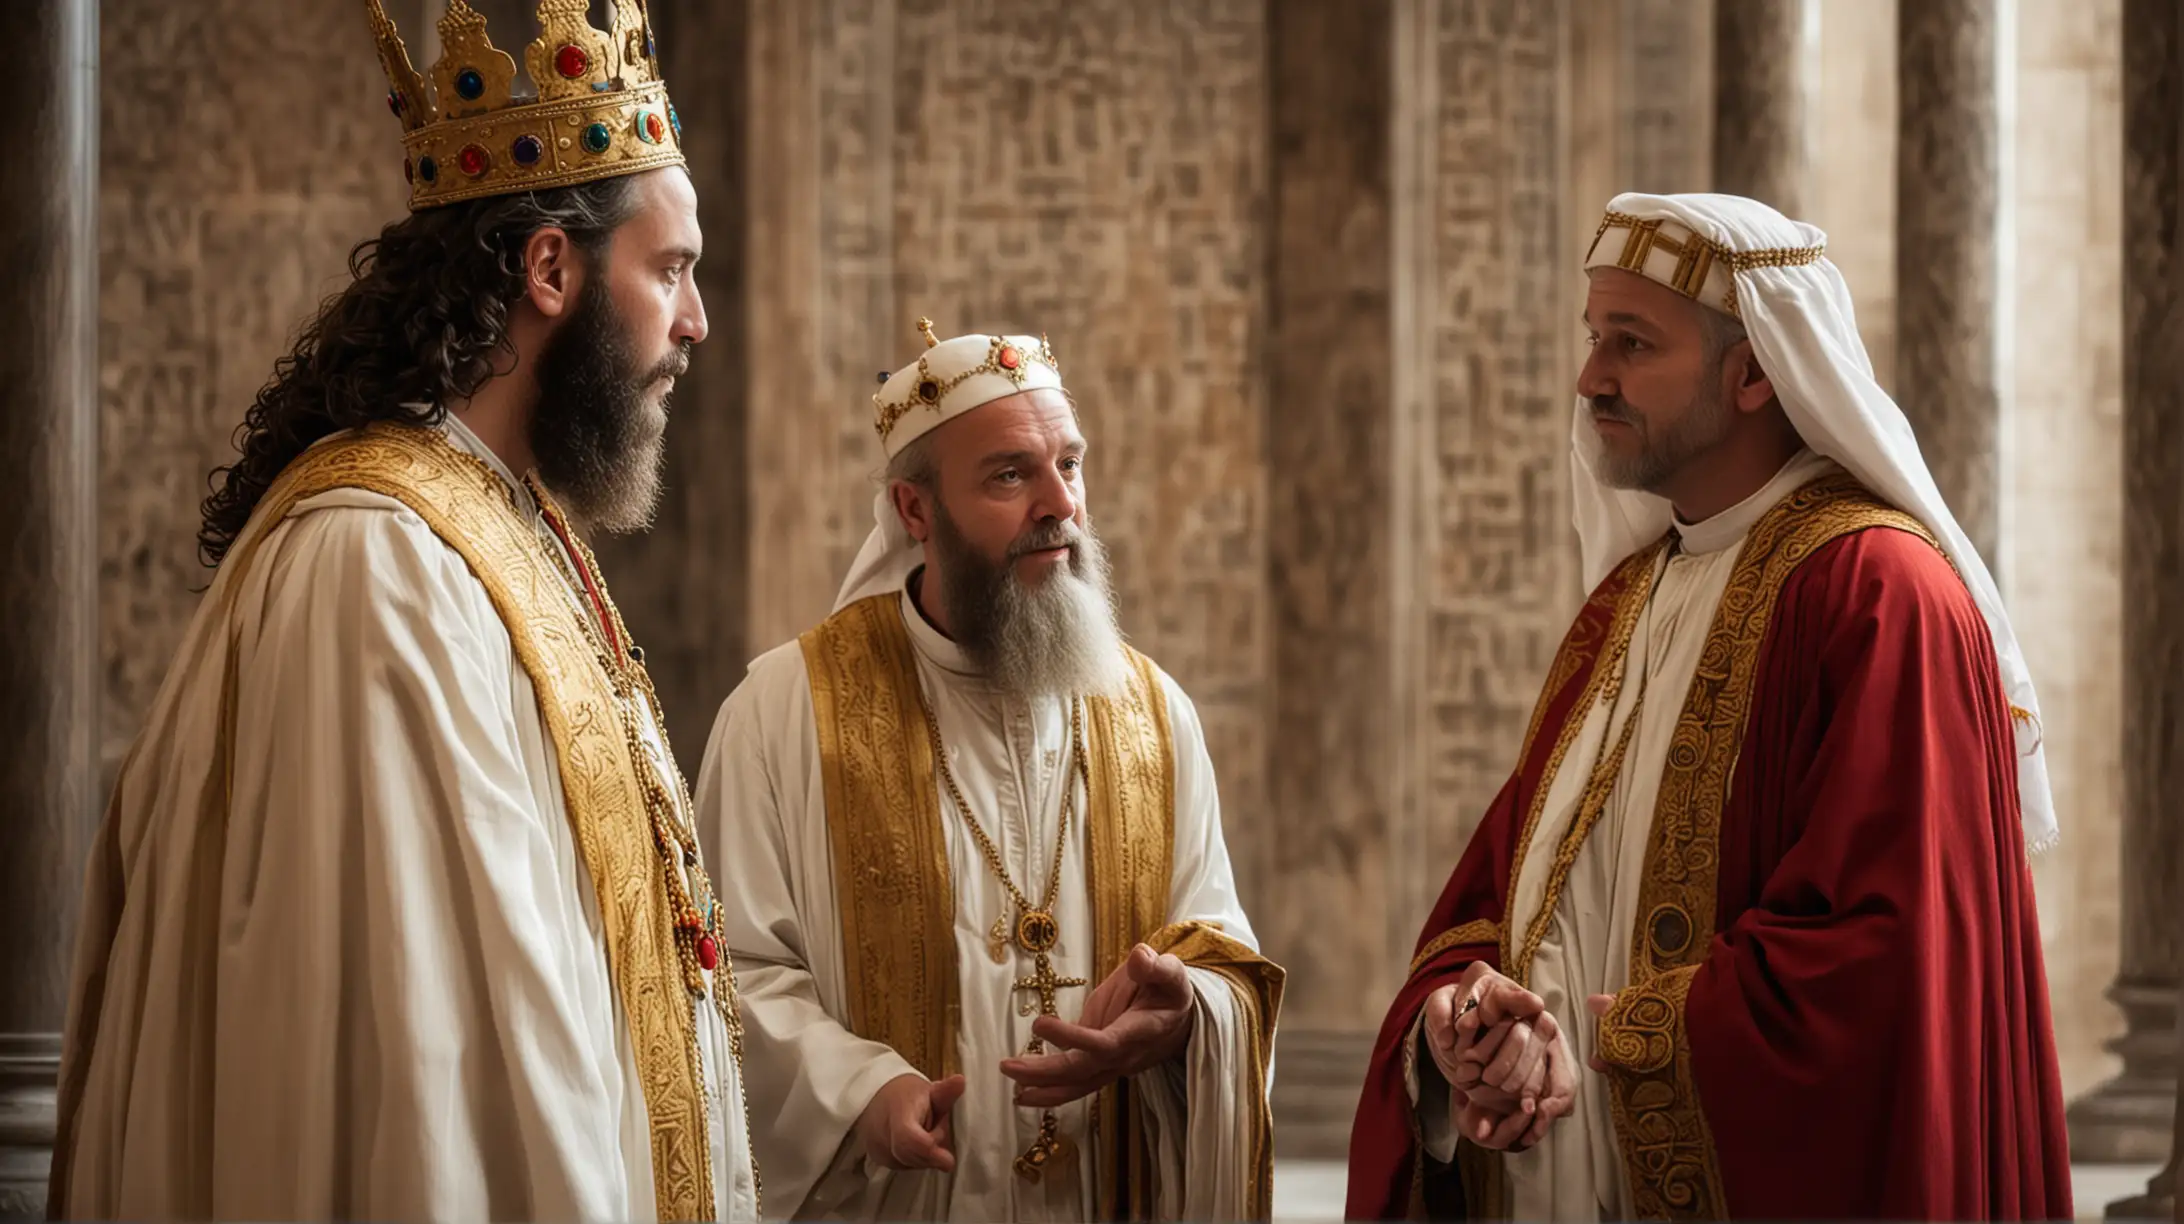 a closeup of 2 Levitical Priests talking to a middle aged King in the Jewish Temple. Set during the Biblical era.